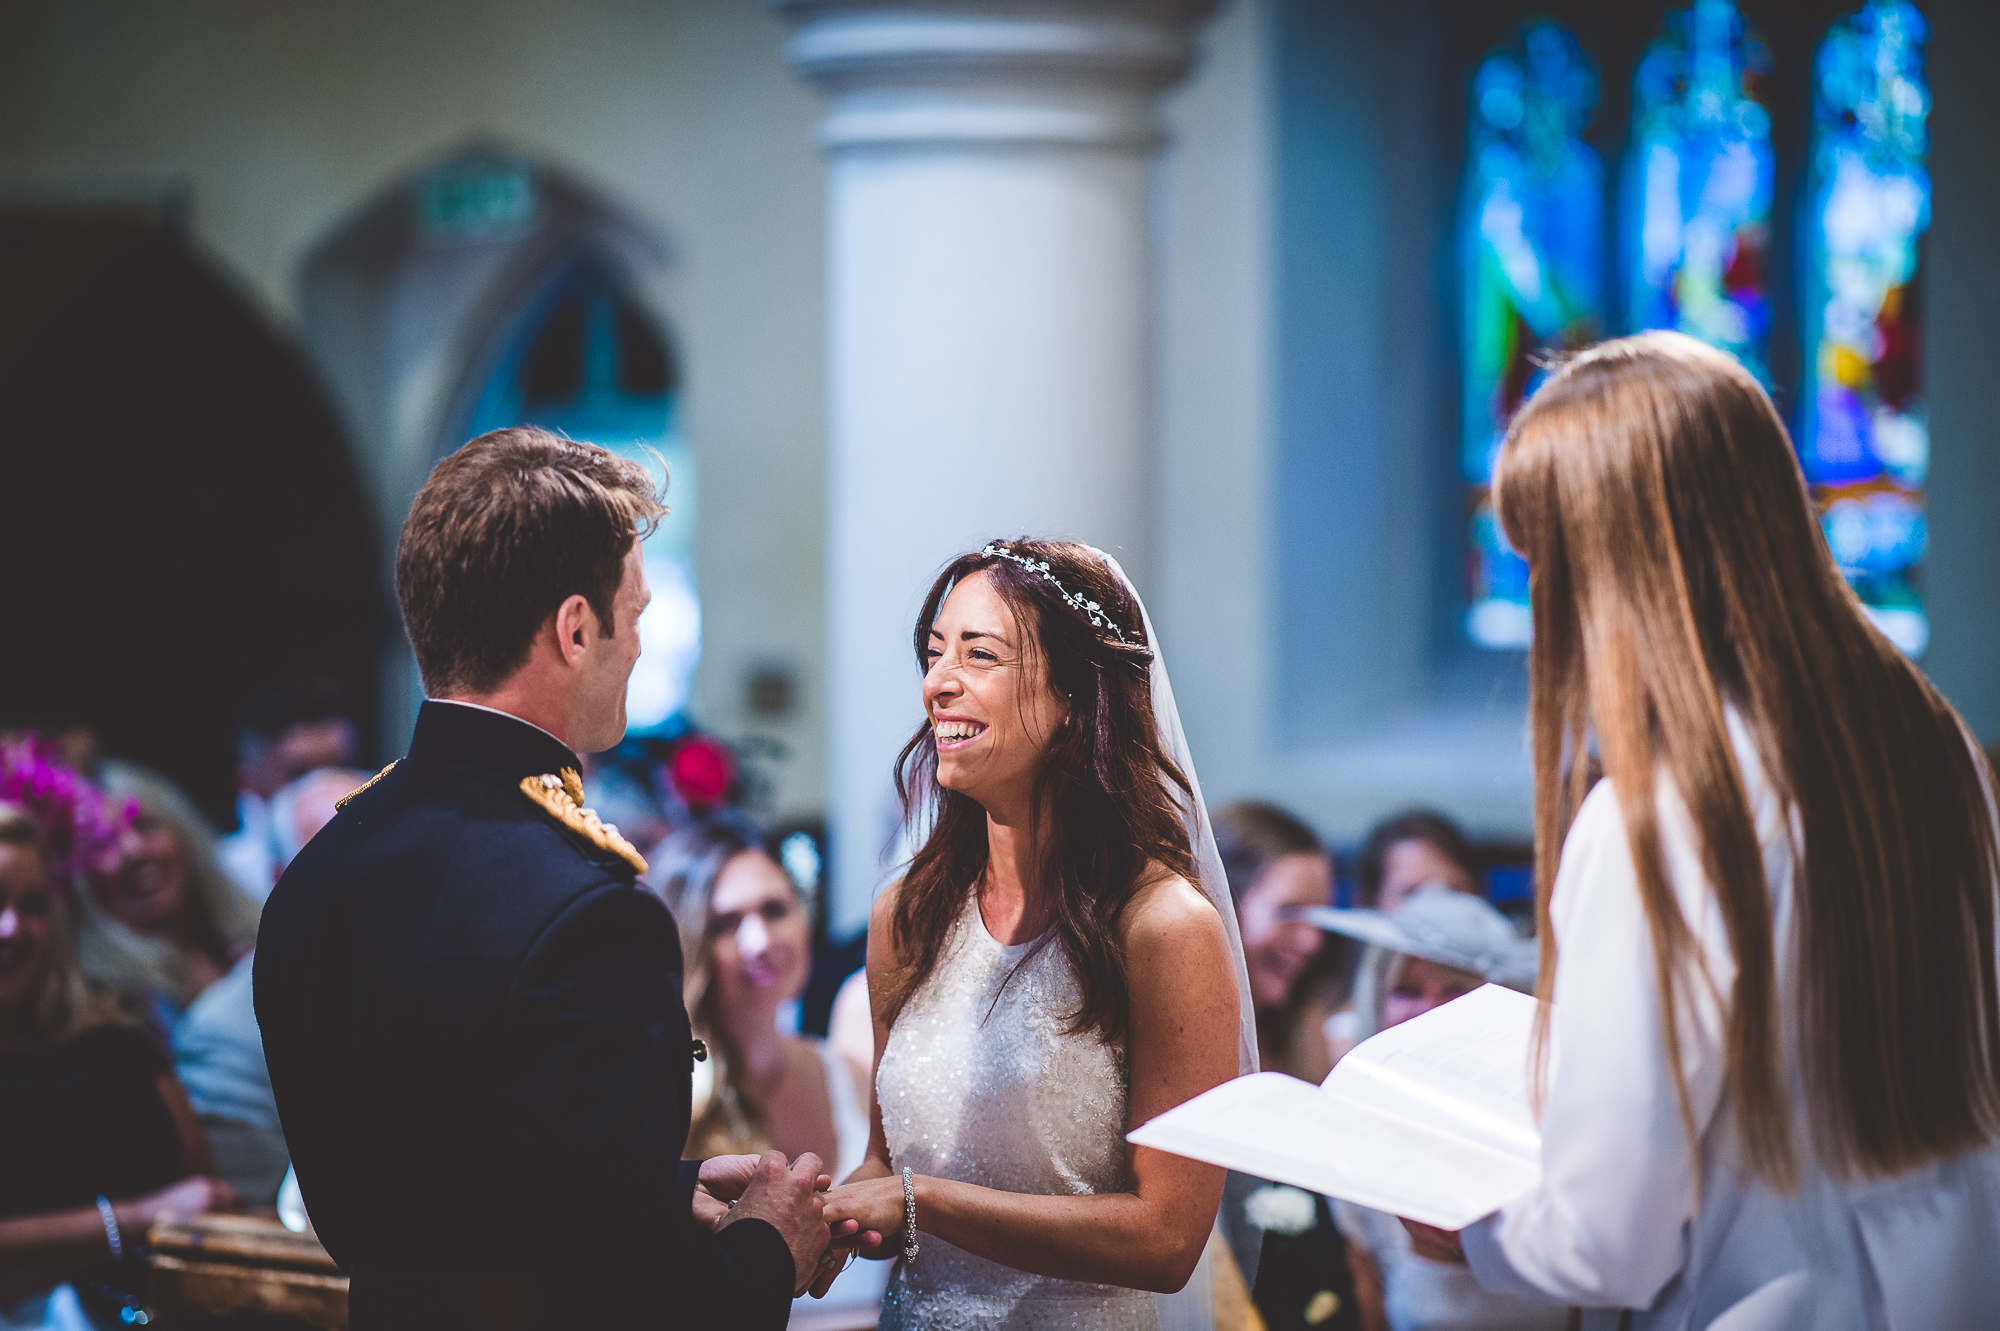 A wedding couple exchange vows in a church, captured by a wedding photographer.